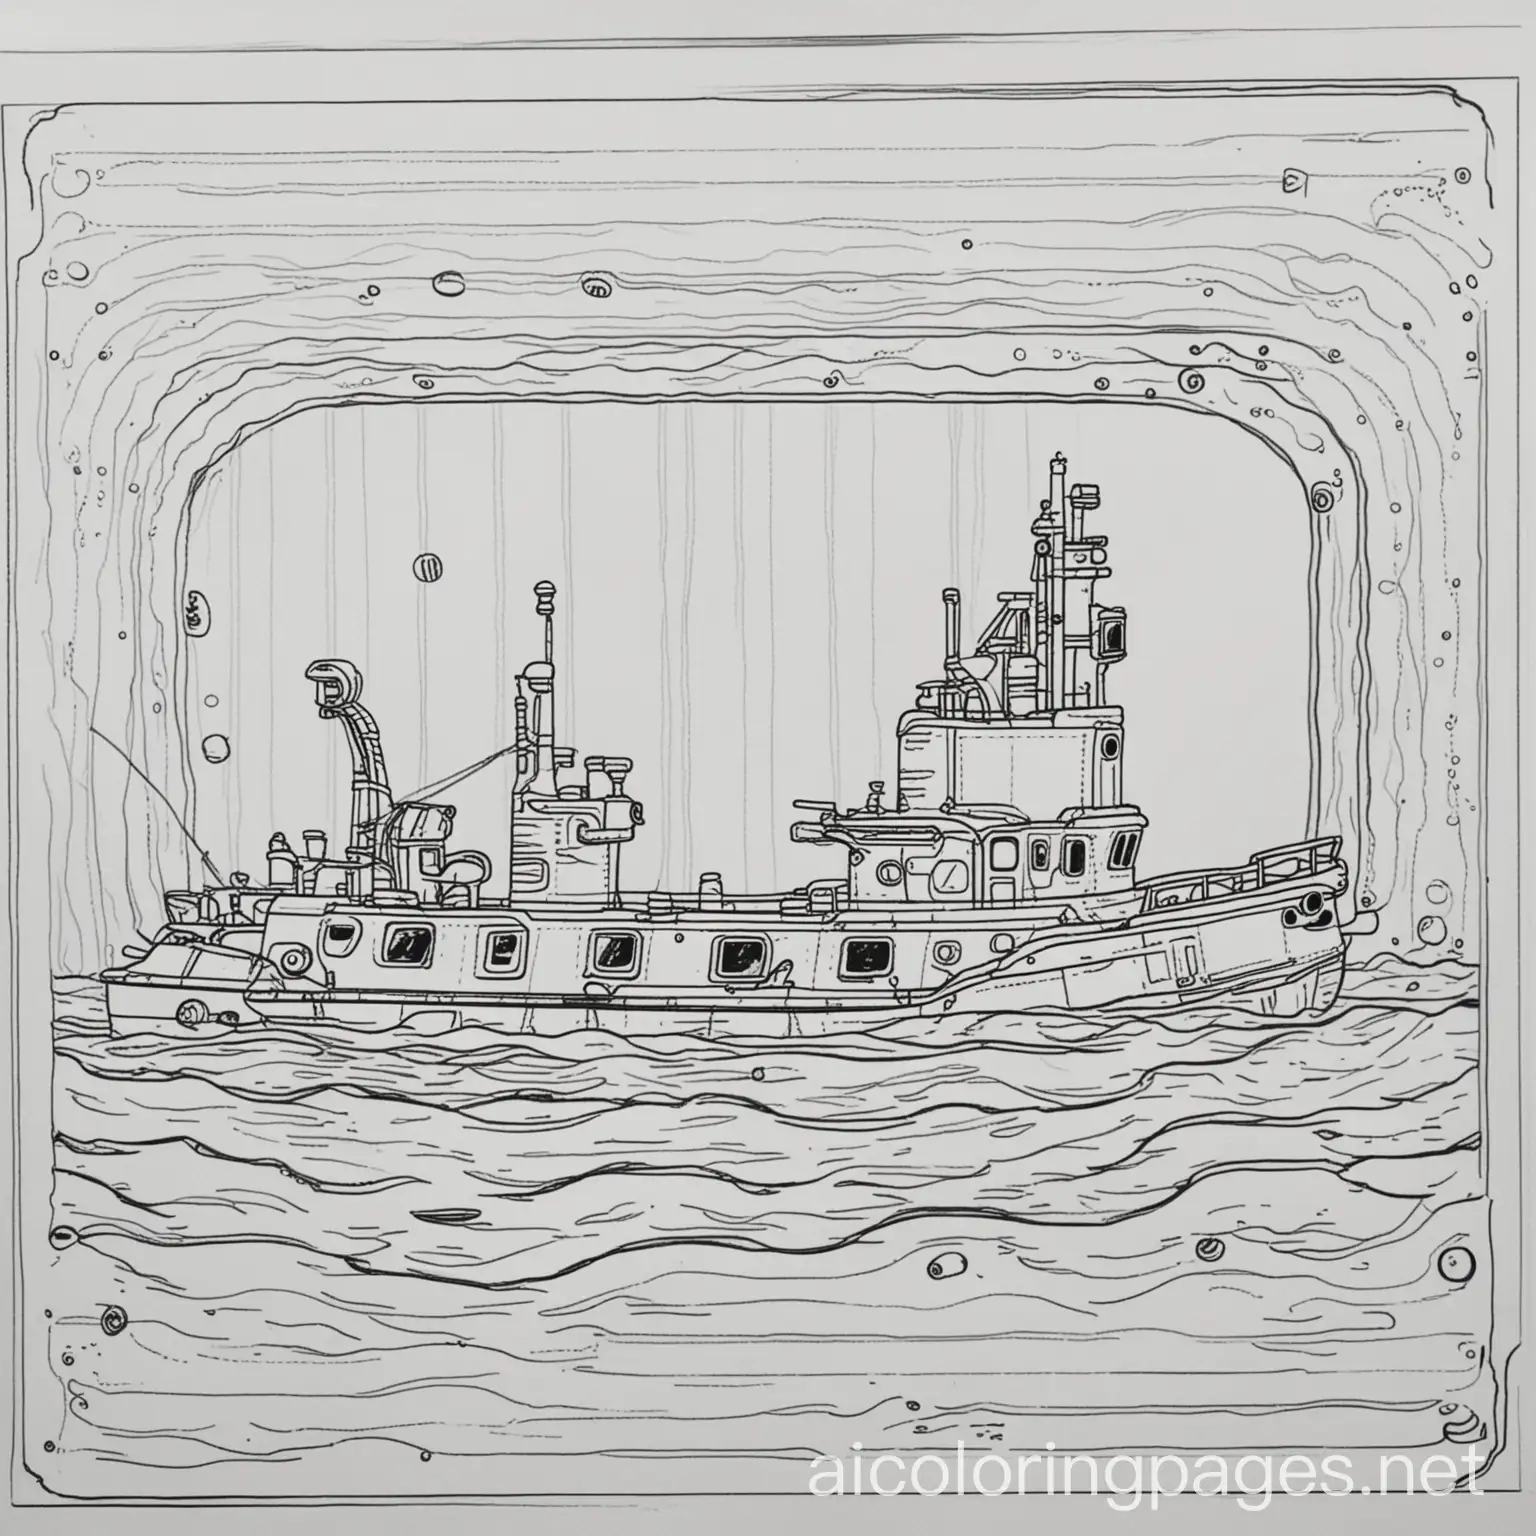 the absurdity of installing a screen door on a submarine, Coloring Page, black and white, line art, white background, Simplicity, Ample White Space. The background of the coloring page is plain white to make it easy for young children to color within the lines. The outlines of all the subjects are easy to distinguish, making it simple for kids to color without too much difficulty